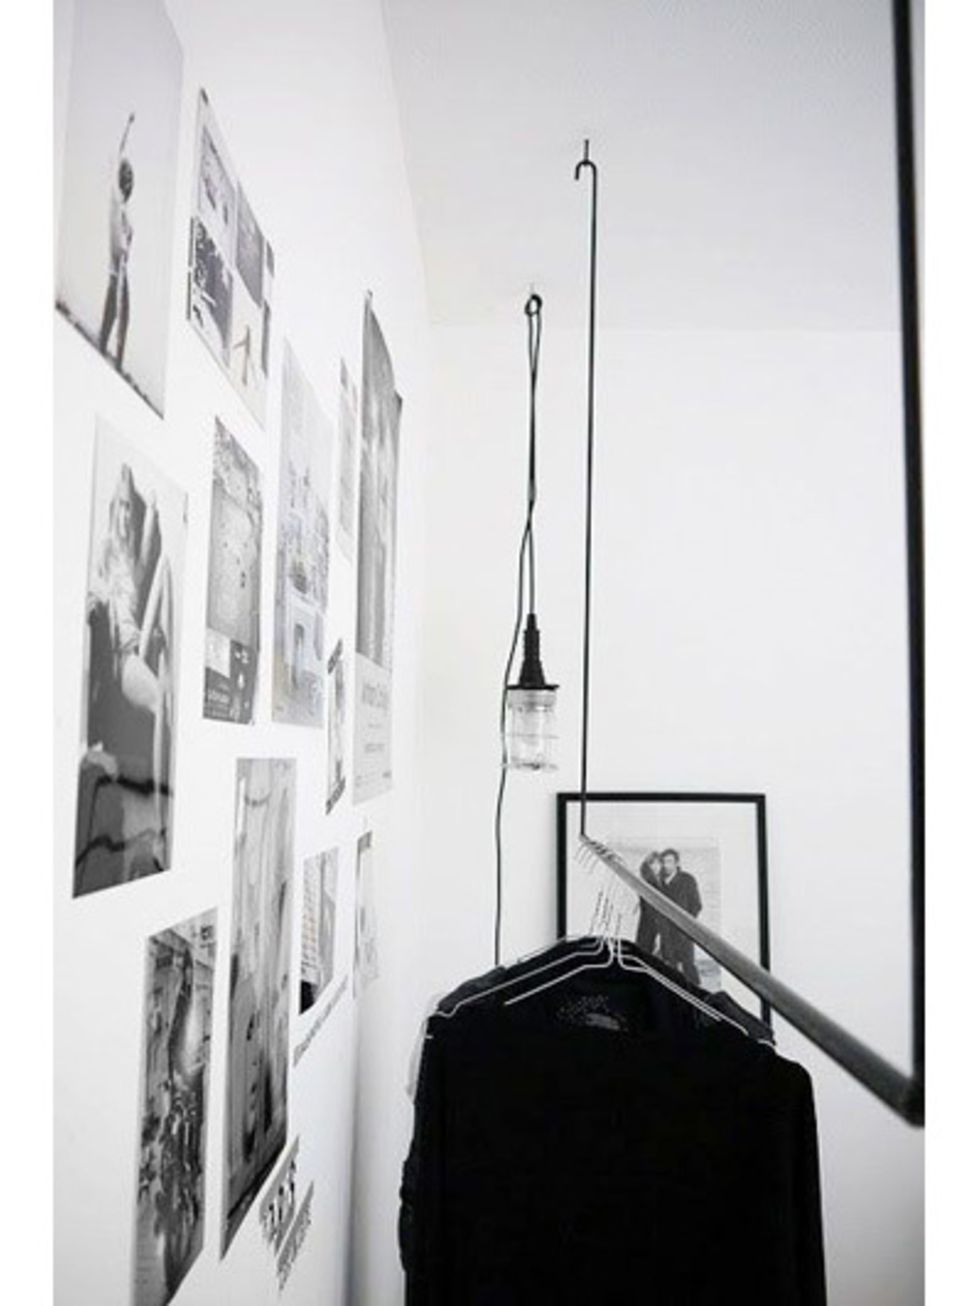 Monochrome photography, Wall, Black-and-white, Monochrome, Luggage and bags, Baggage, Exhibition, Collection, Art gallery, Visual arts, 